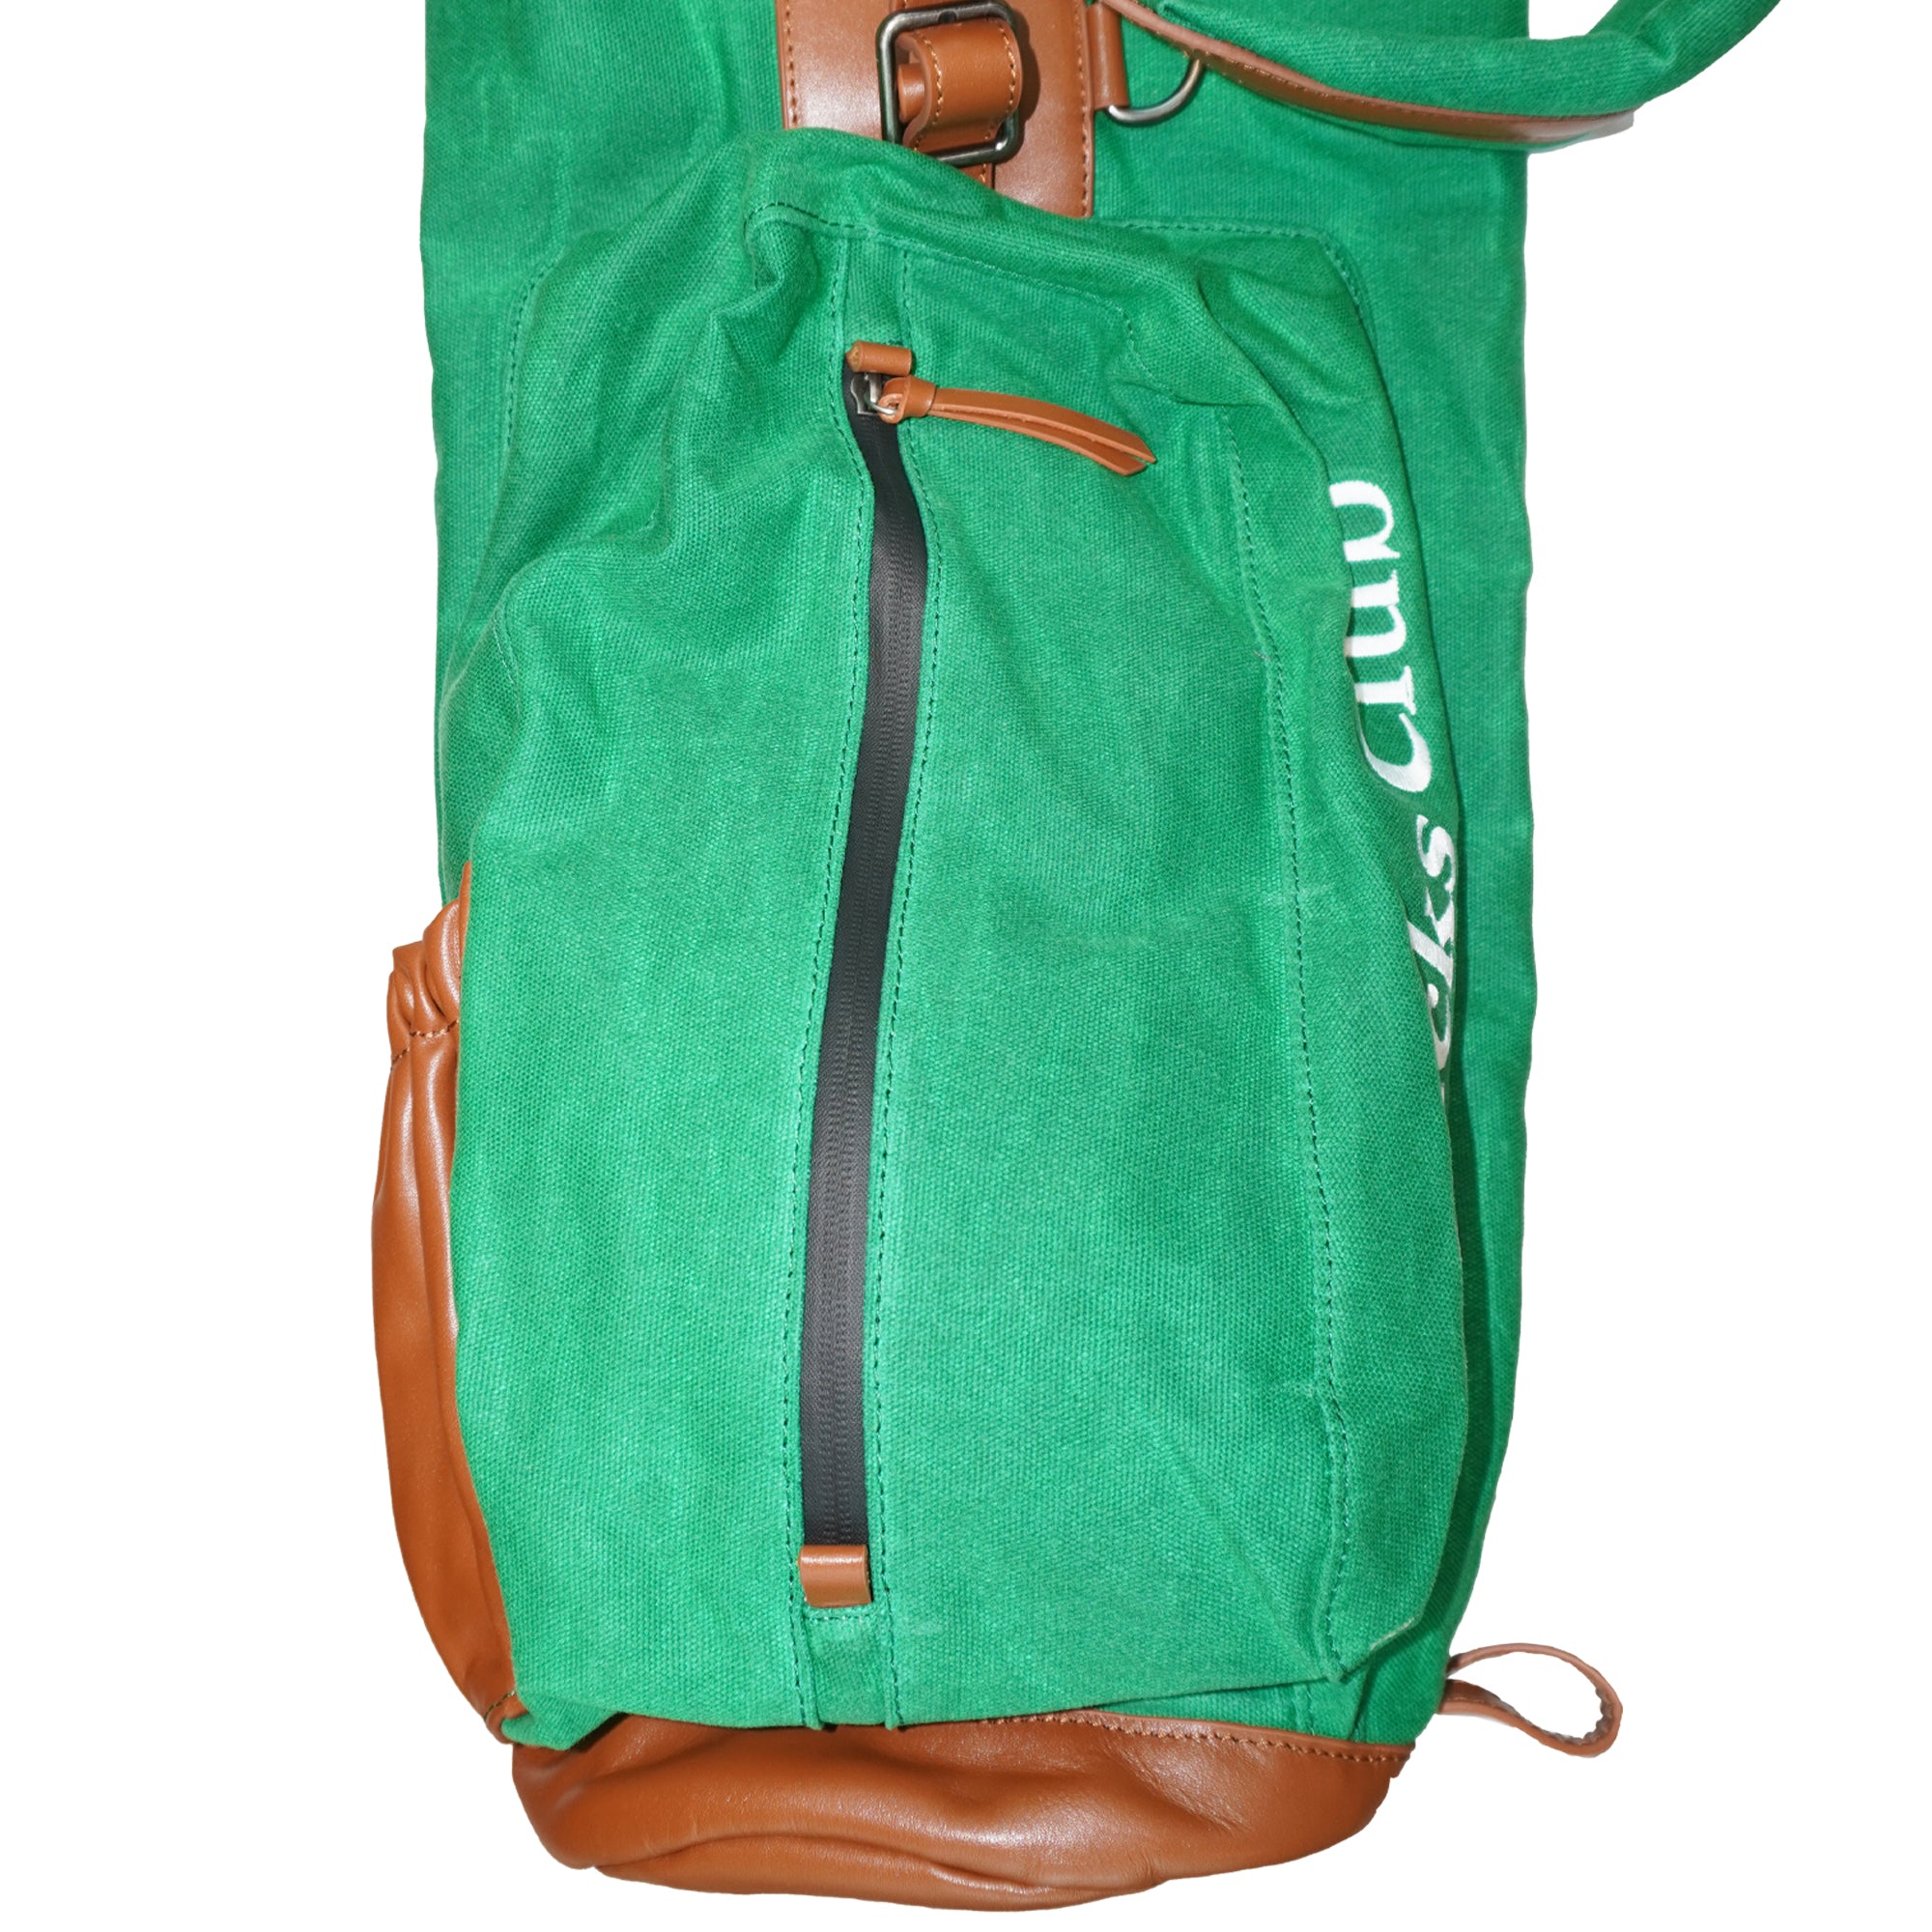 The Sticks Club Forest Green Carry Bag